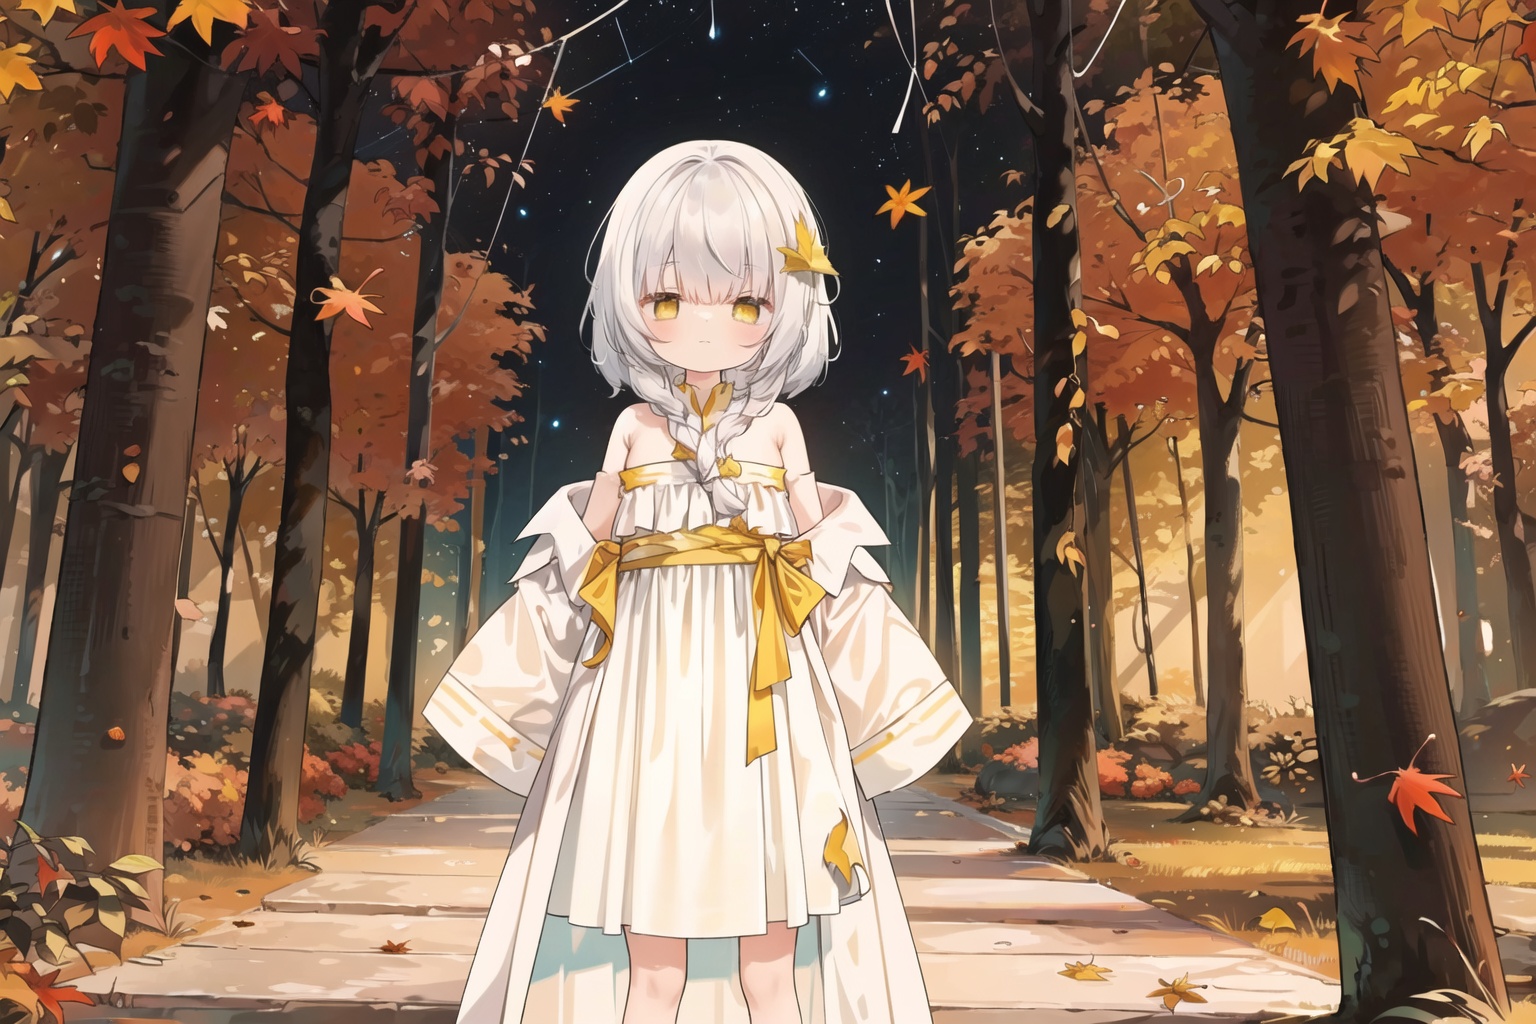  wallpaper,colorful,Tyndall effect,(autumn maple forest:1.3),(very few fallen leaves),(path),stars,flower sea,starry sky,flowers meadows,Dreamy forest,strong rim light, 1girl, bare shoulders, white hair, blinking, white dress, closed mouth, constel lation, yellow eyes, flat color, braid, blinking, white robe, float, closed mouth, constel lation, flat color, looking up, standing, medium hair, standing, solo, , 4349
